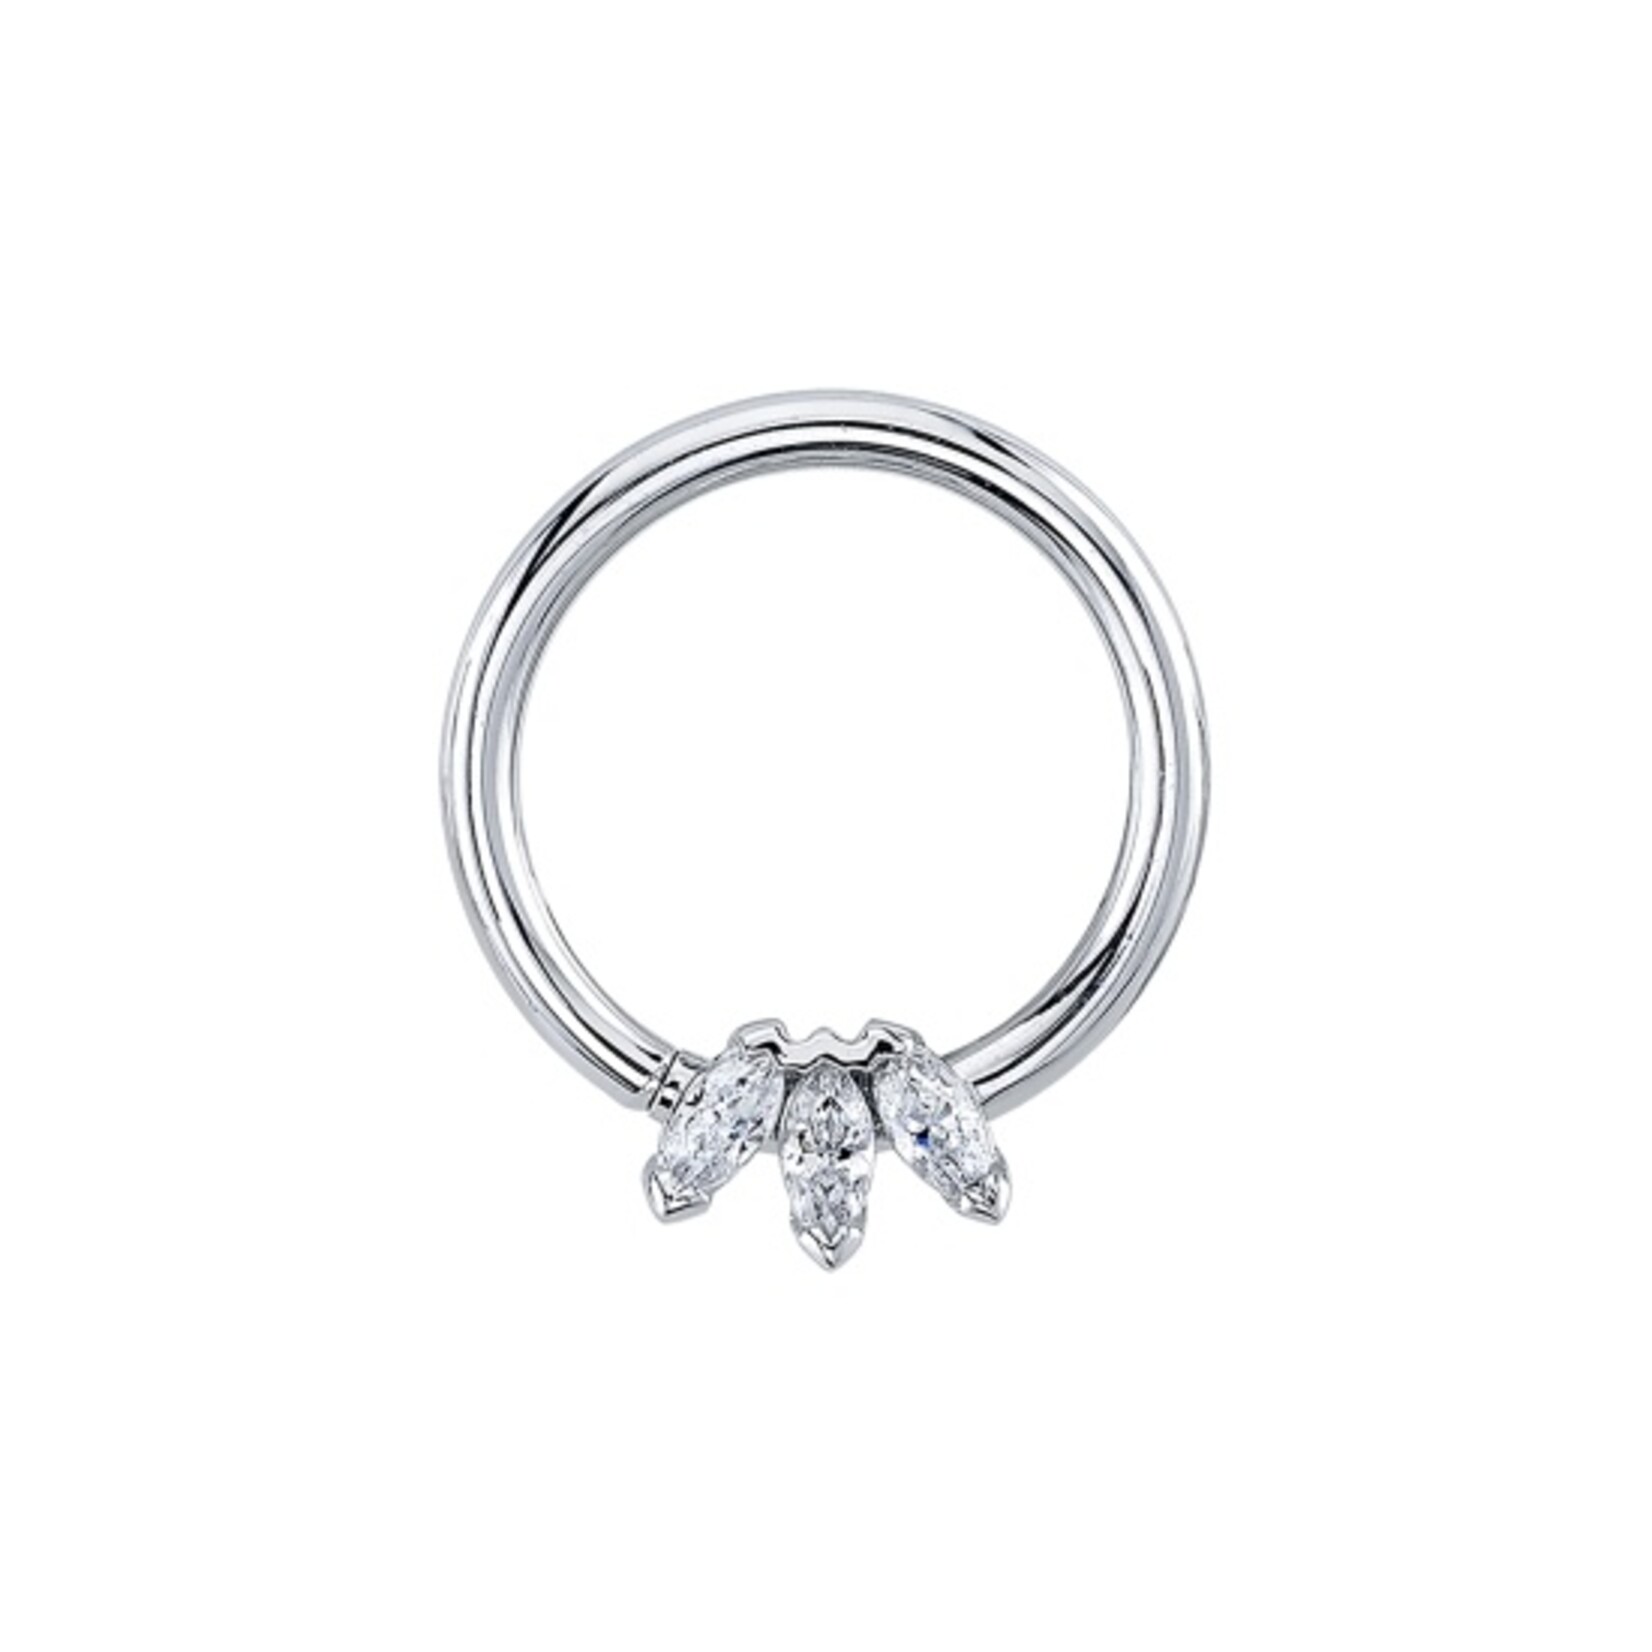 BVLA BVLA 16g Marquise Fan seam ring with 3x 3x1.5 CZ